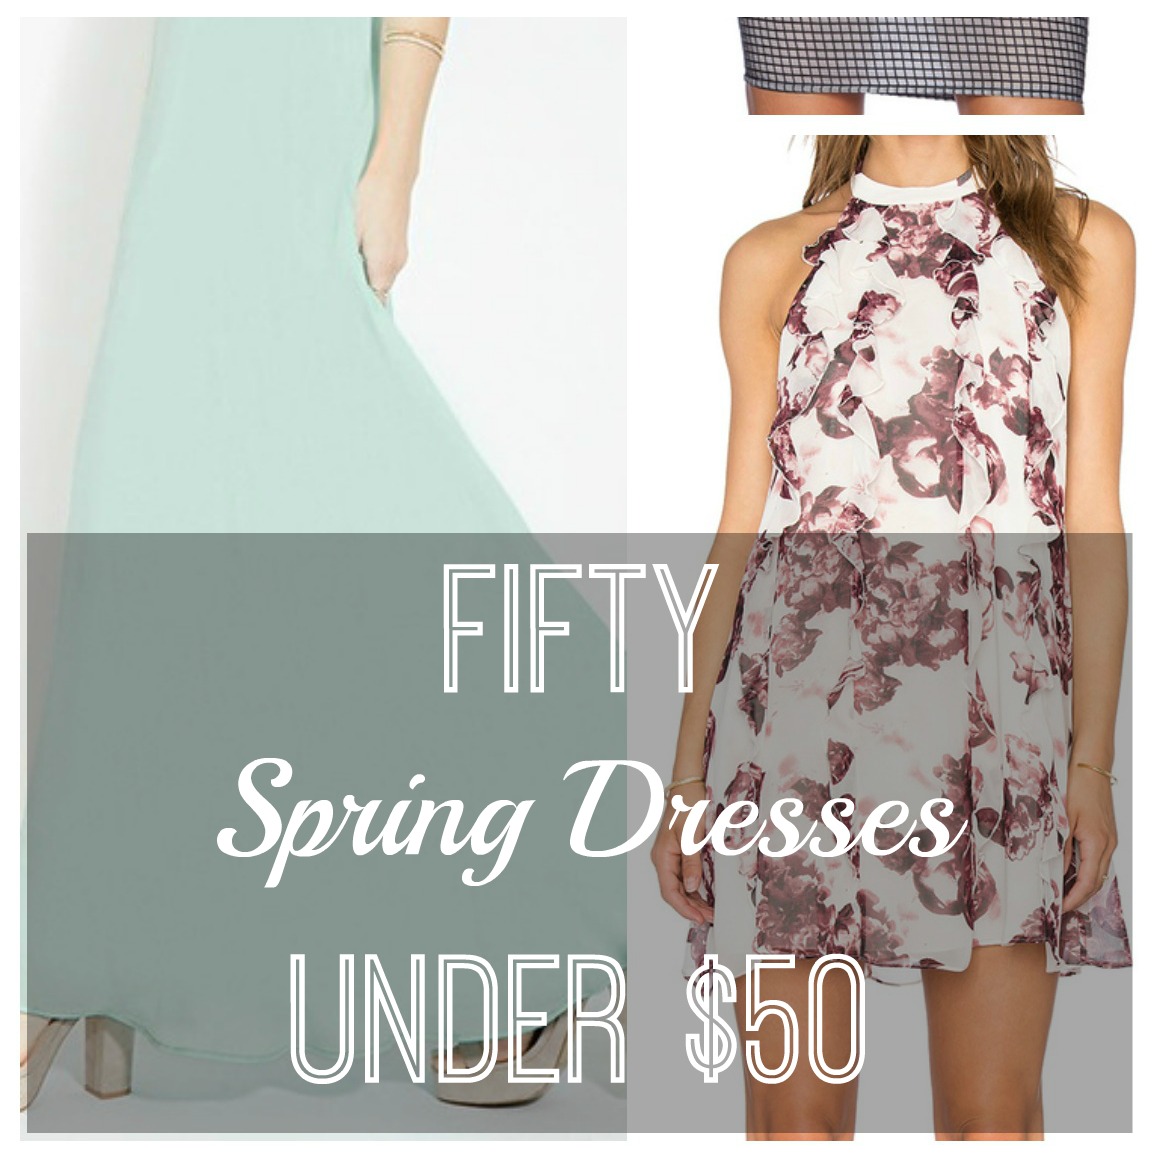 50 spring dressed under $50 small pic.jpg